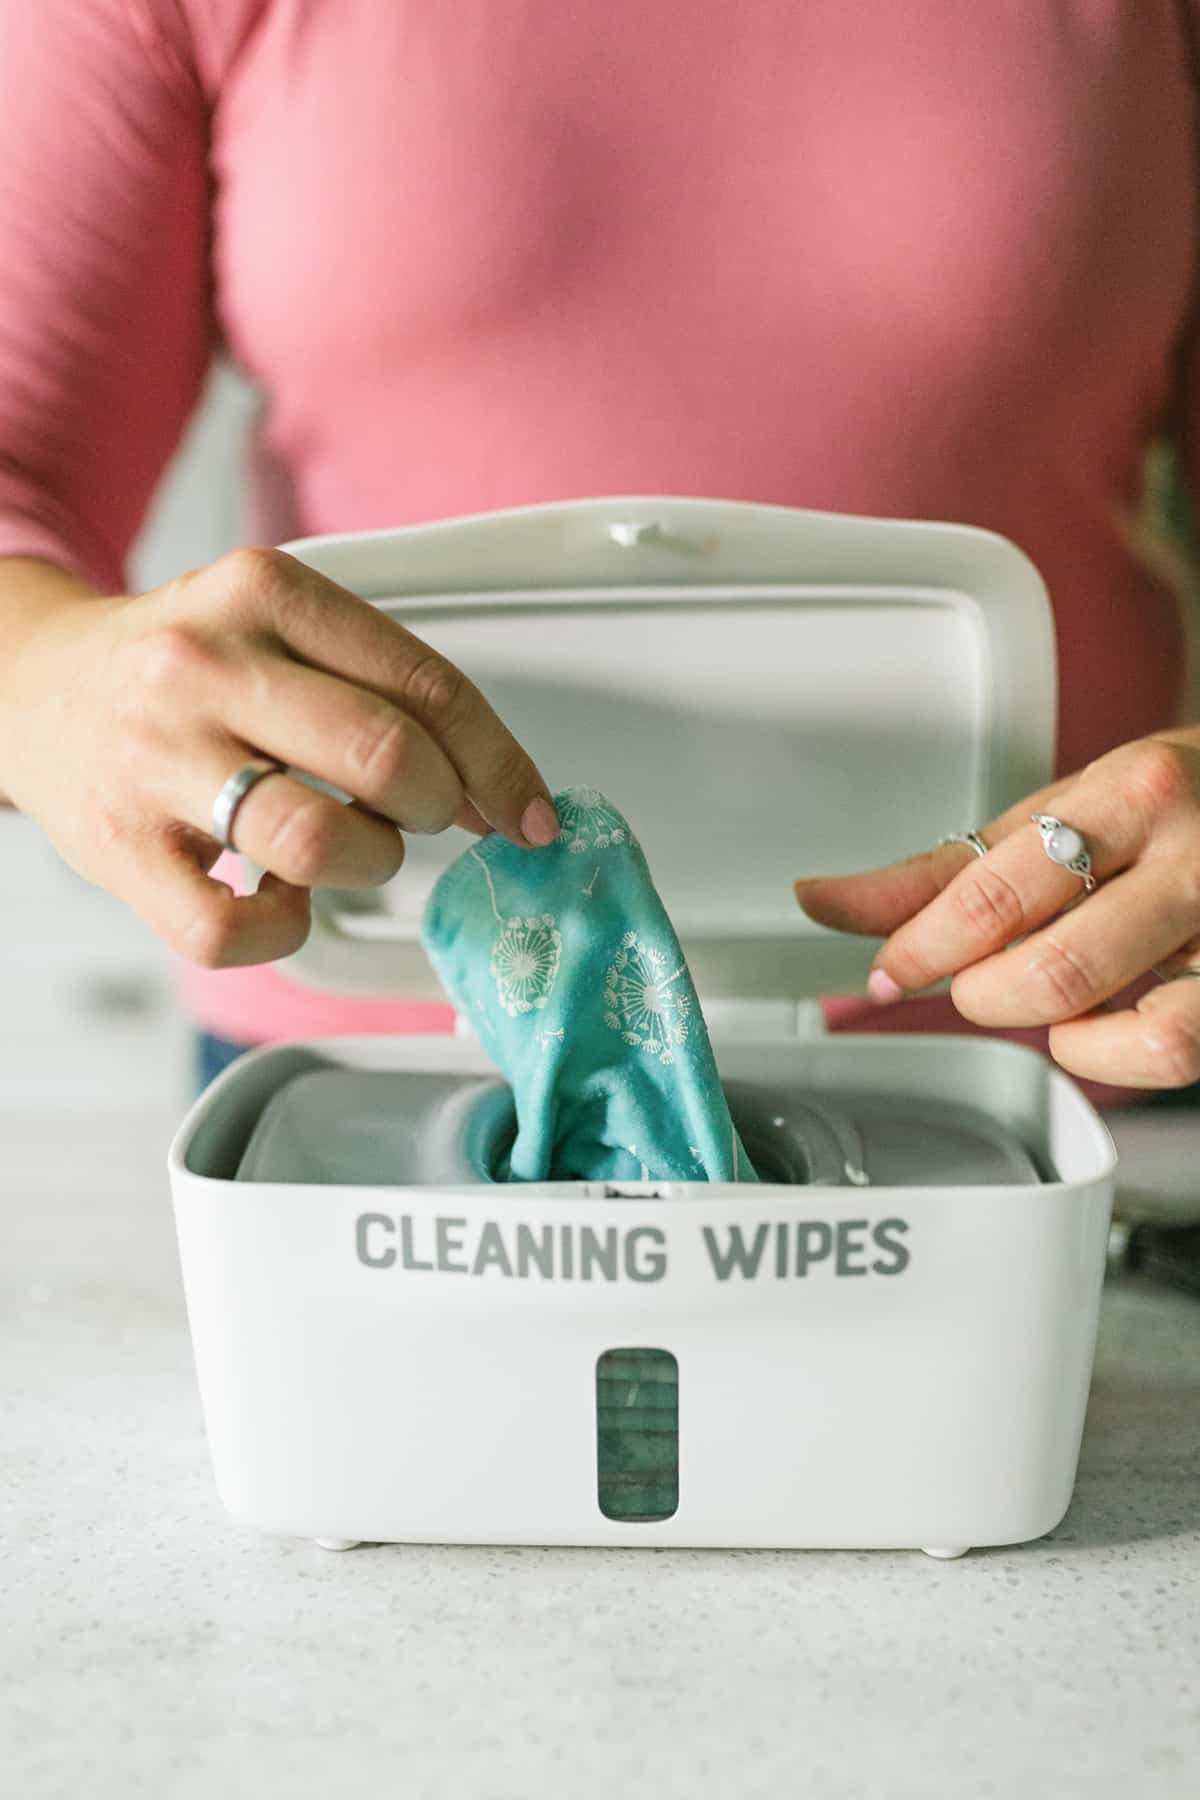 DIY Disinfecting Wipes - Reusable All